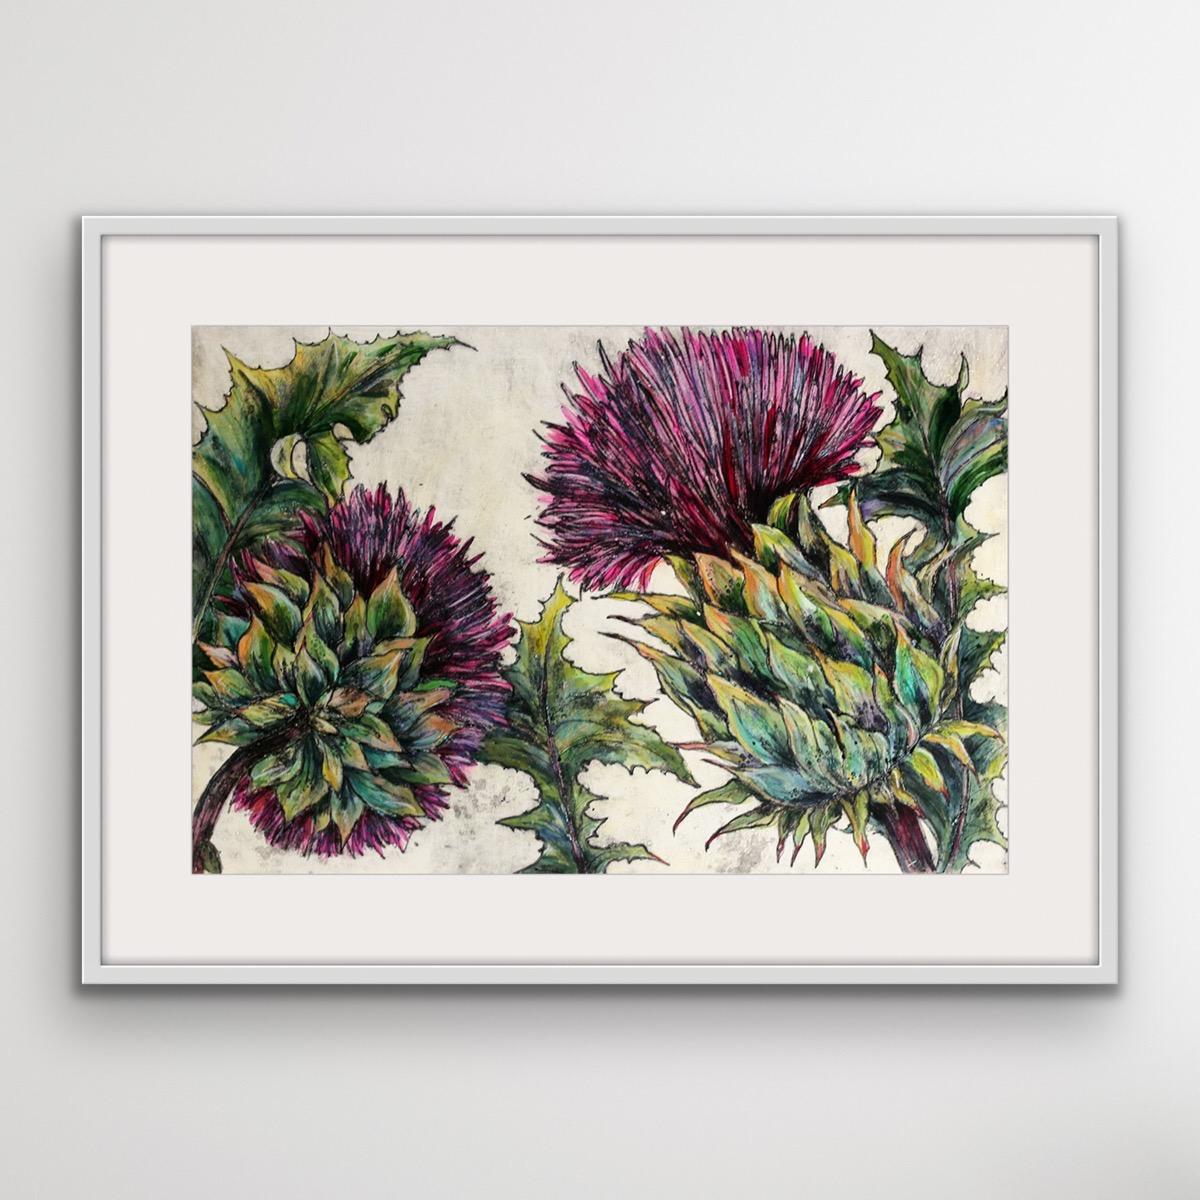 Vicky Oldfield artist and printmaker, ‘Cardoon’ is a hand coloured collagraph print, the print is taken from a plate which has been collaged with a variety of textured materials. The plates are then sealed and then inked up and printed in intaglio